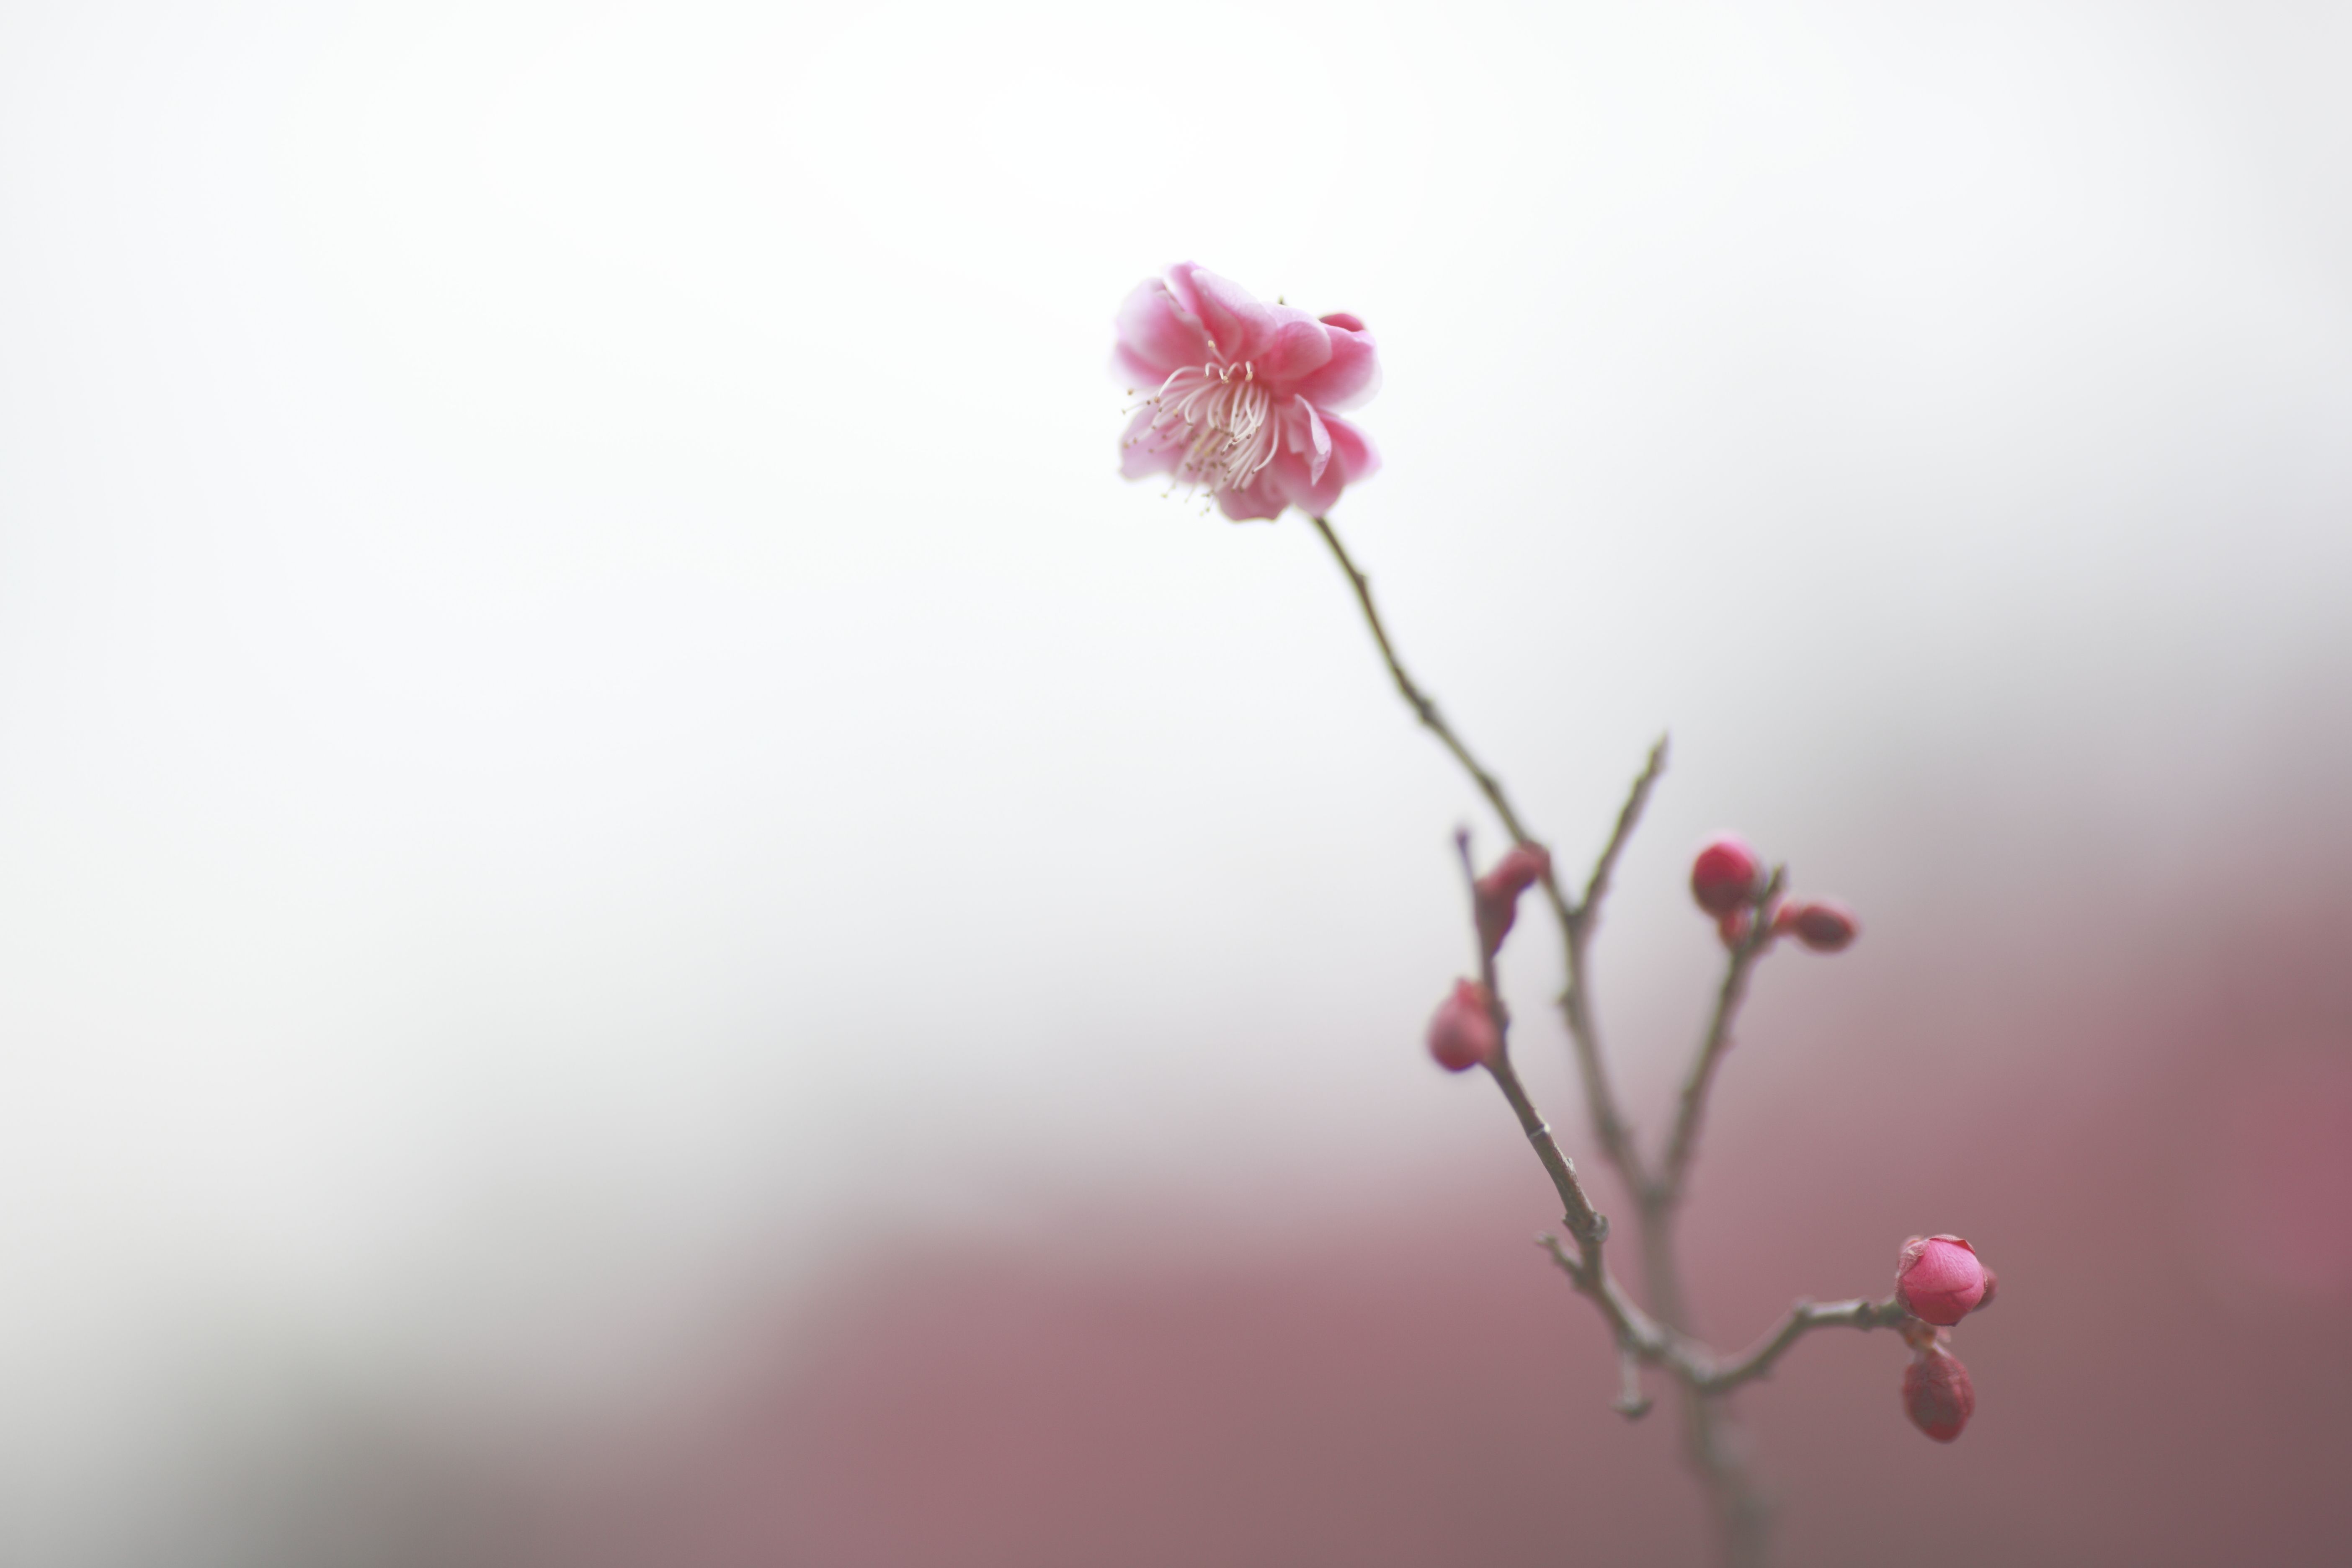 Wallpaper, red, sky, branch, morning, Canon, cherry blossom, pastel, pink, spring, color, flower, ume, flora, bud, petal, twig, computer wallpaper, close up, macro photography, plant stem 5616x3744